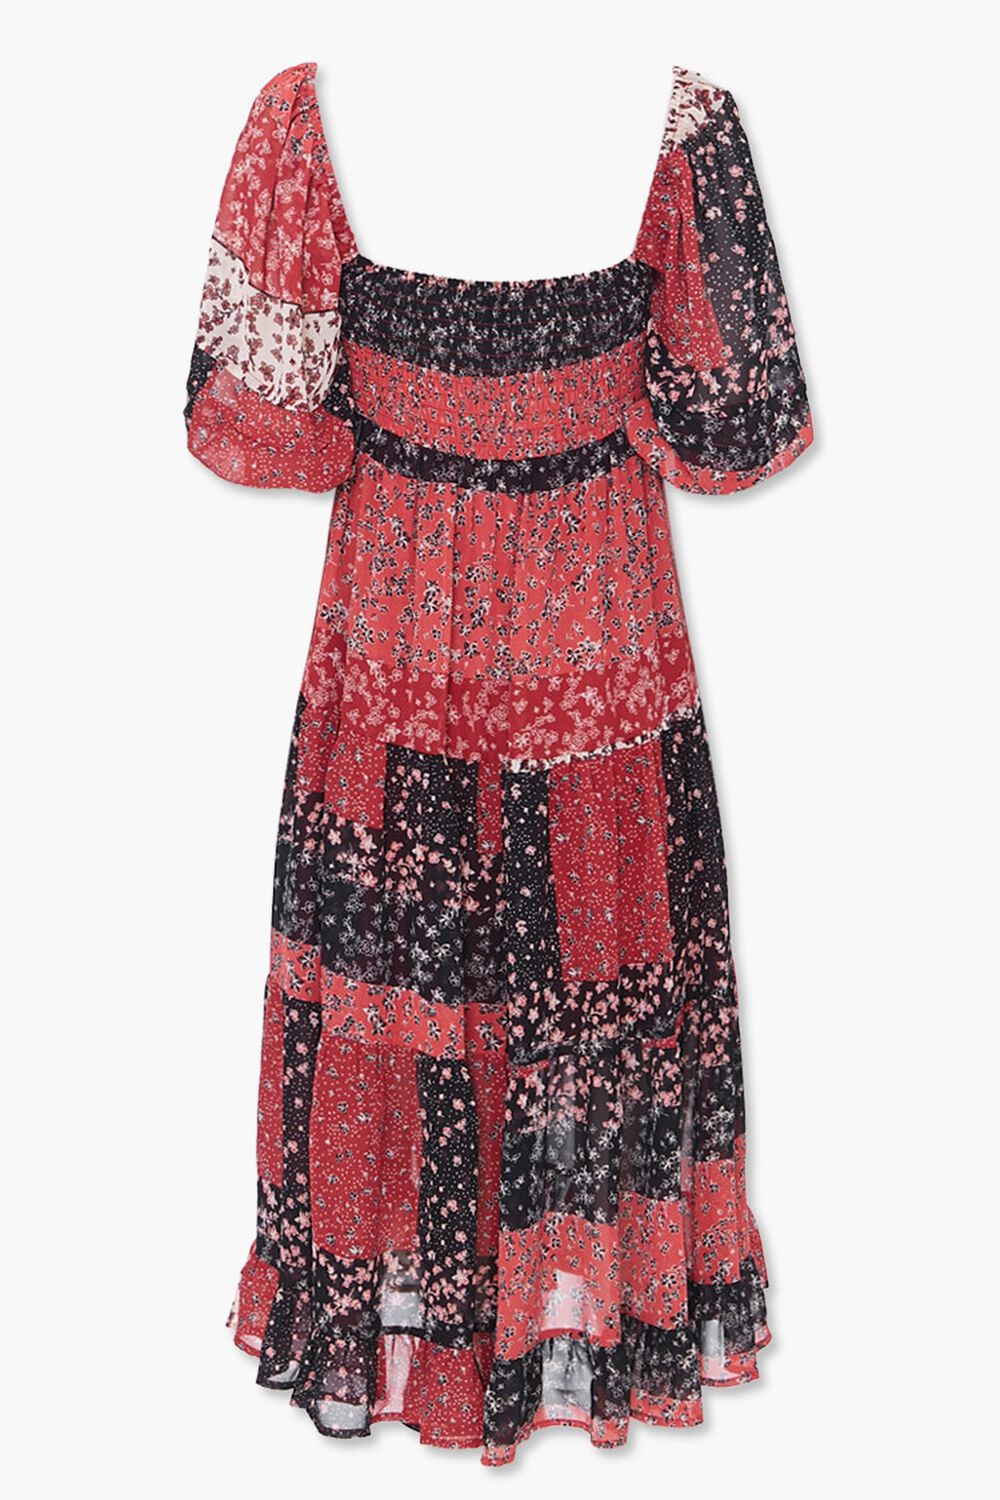 RED/MULTI Ditsy Floral Midi Dress, image 2